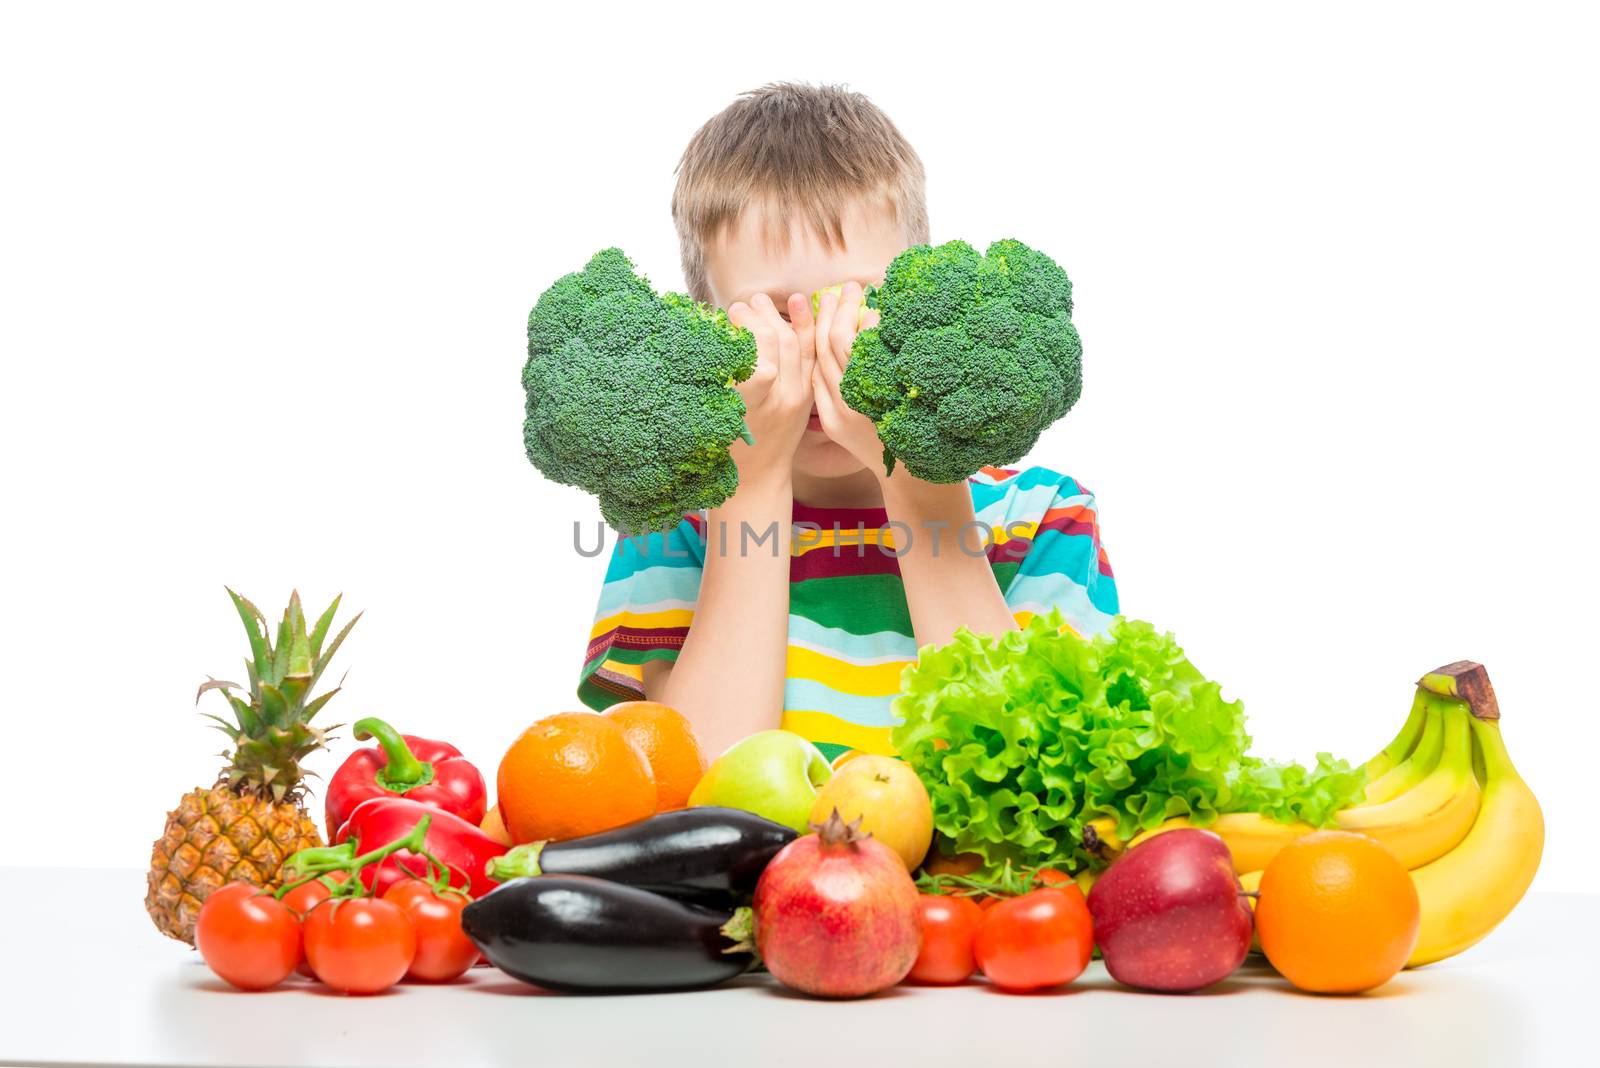 Boy playing with broccoli and a bunch of vegetables and fruits posing in the studio isolated on white background